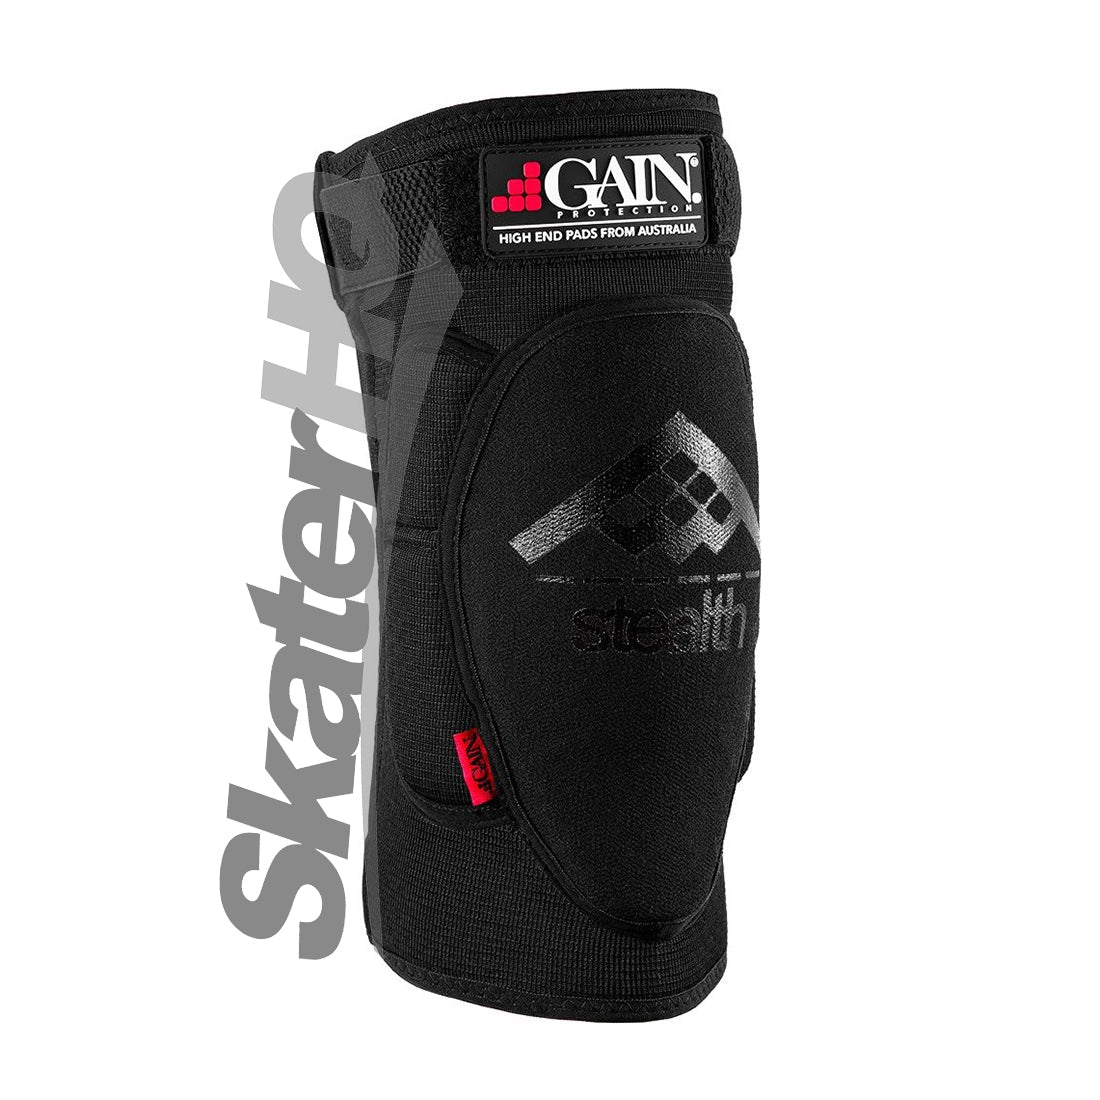 GAIN Stealth Knee Pads - Black - M Protective Gear